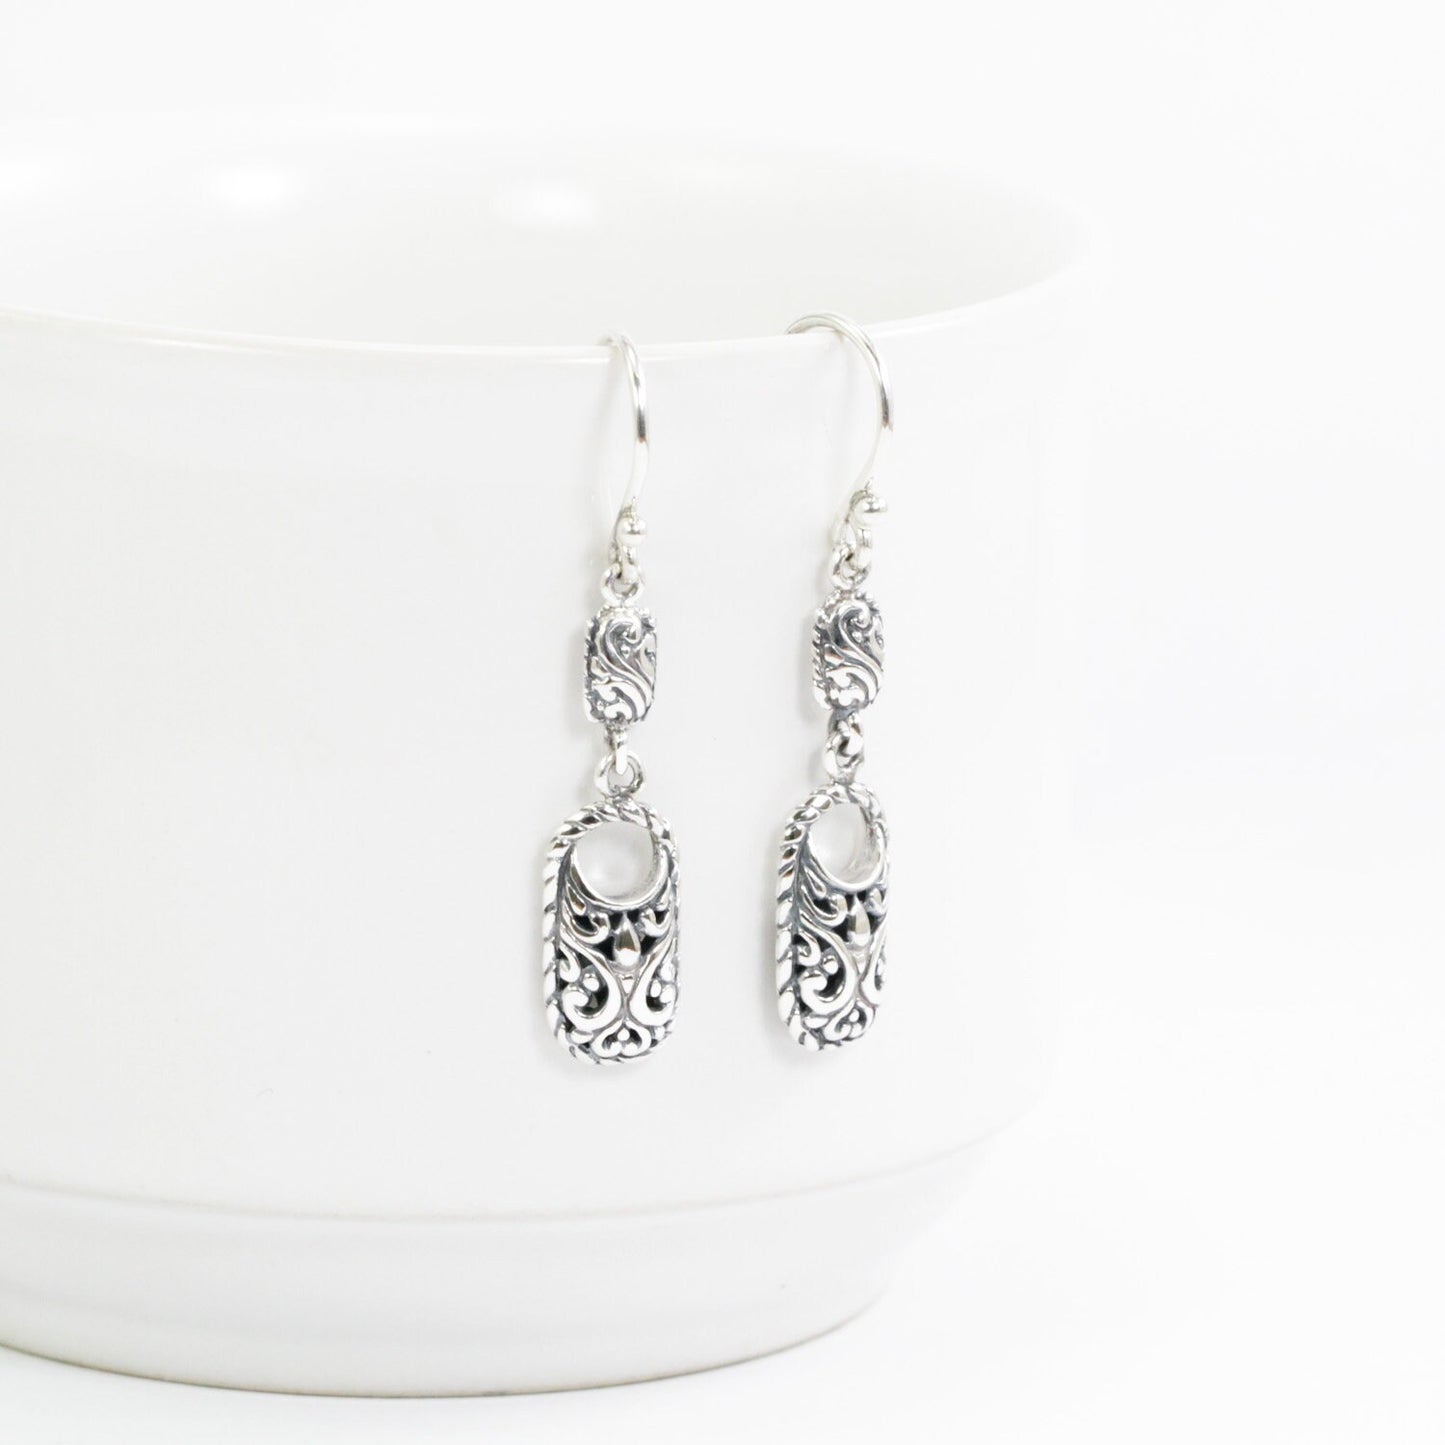 925 sterling silver earrings decorated with swirl filigree